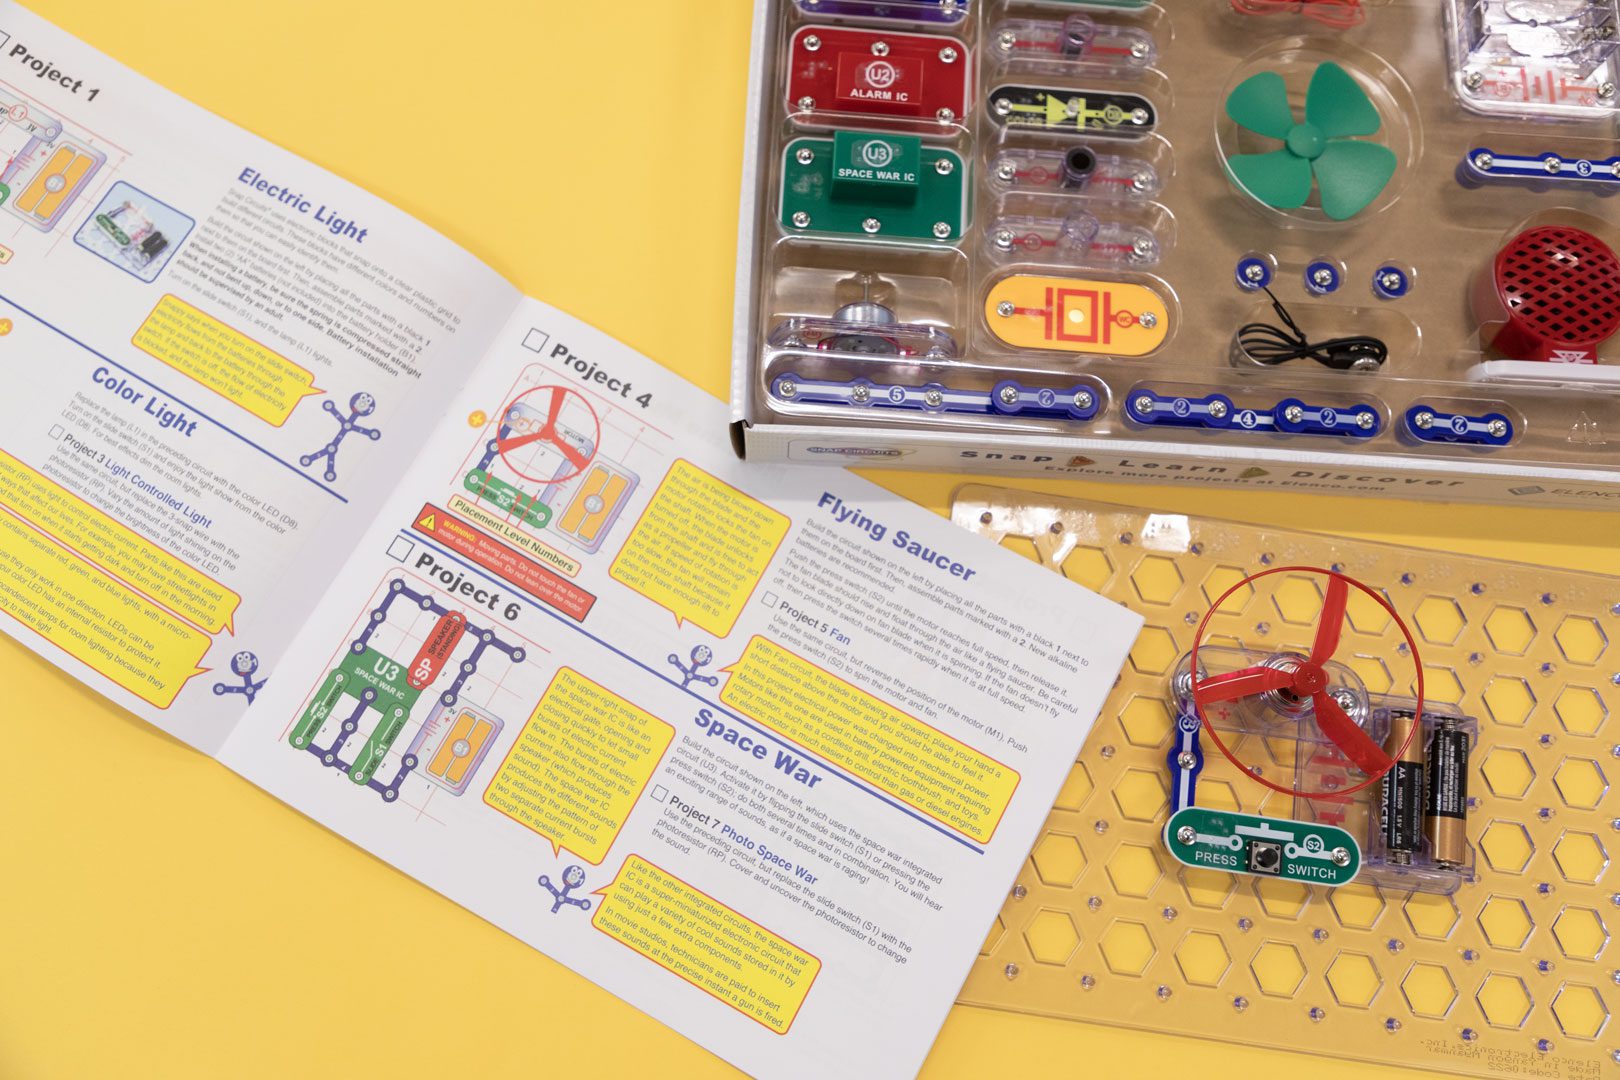 Snap Circuits Jr. Select SC-130 Electronics Exploration Kit | Over 130  Projects | Full Color Project Manual | 30+ Parts | STEM Educational Toys  for